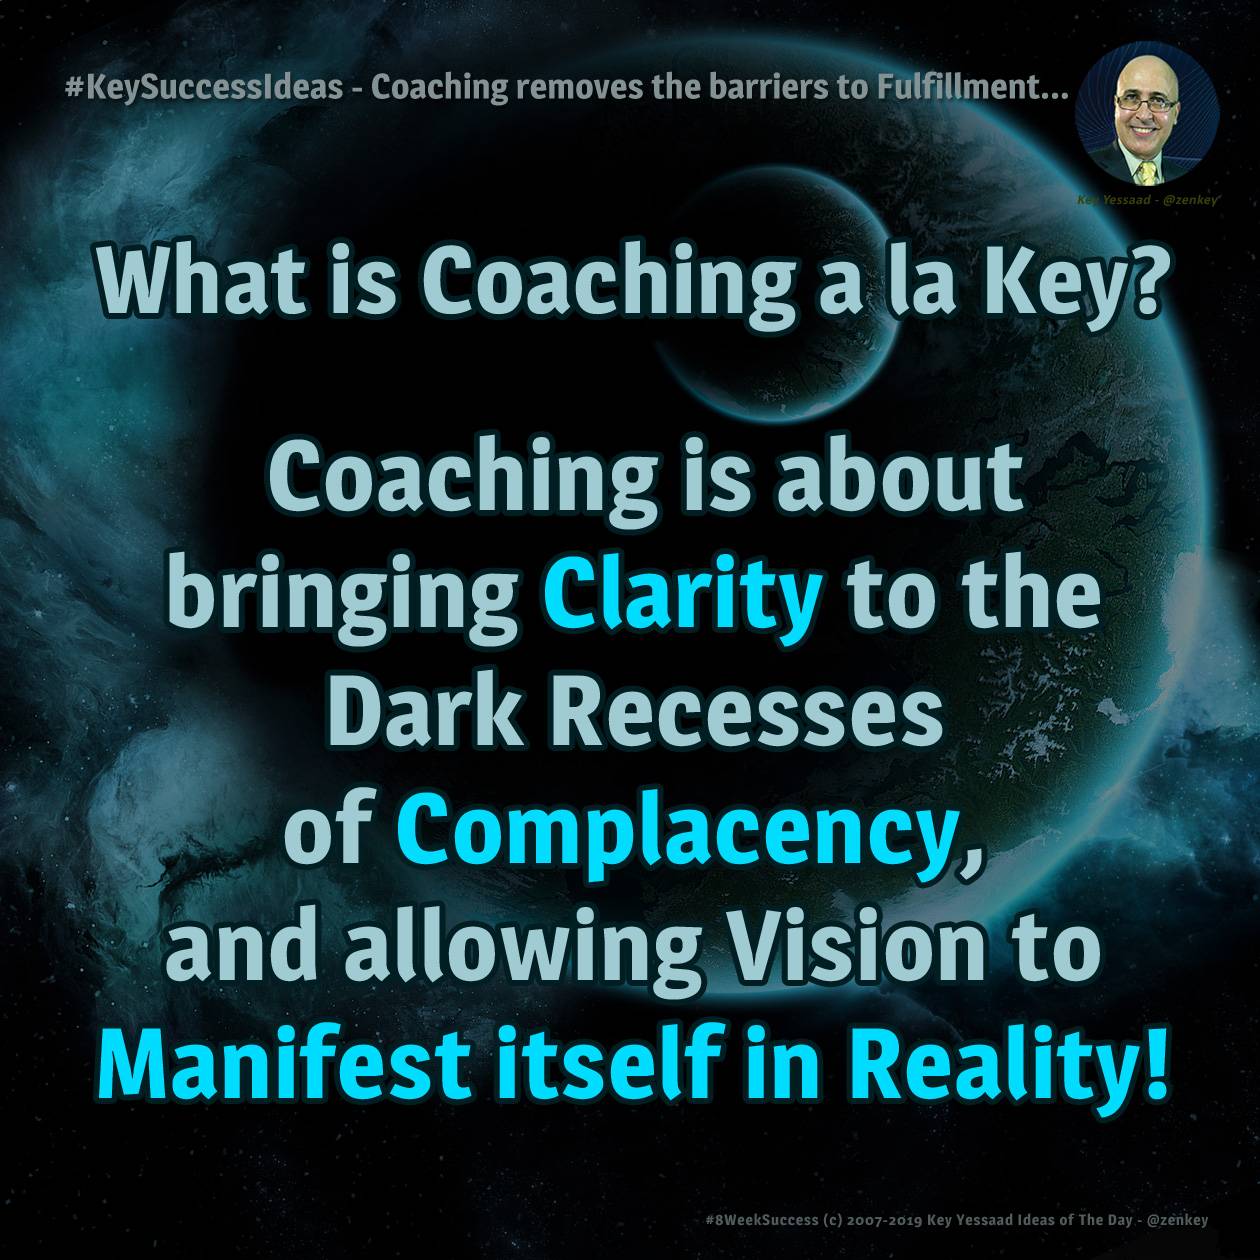 #KeySuccessIdeas - Coaching removes the barriers to Fulfillment...